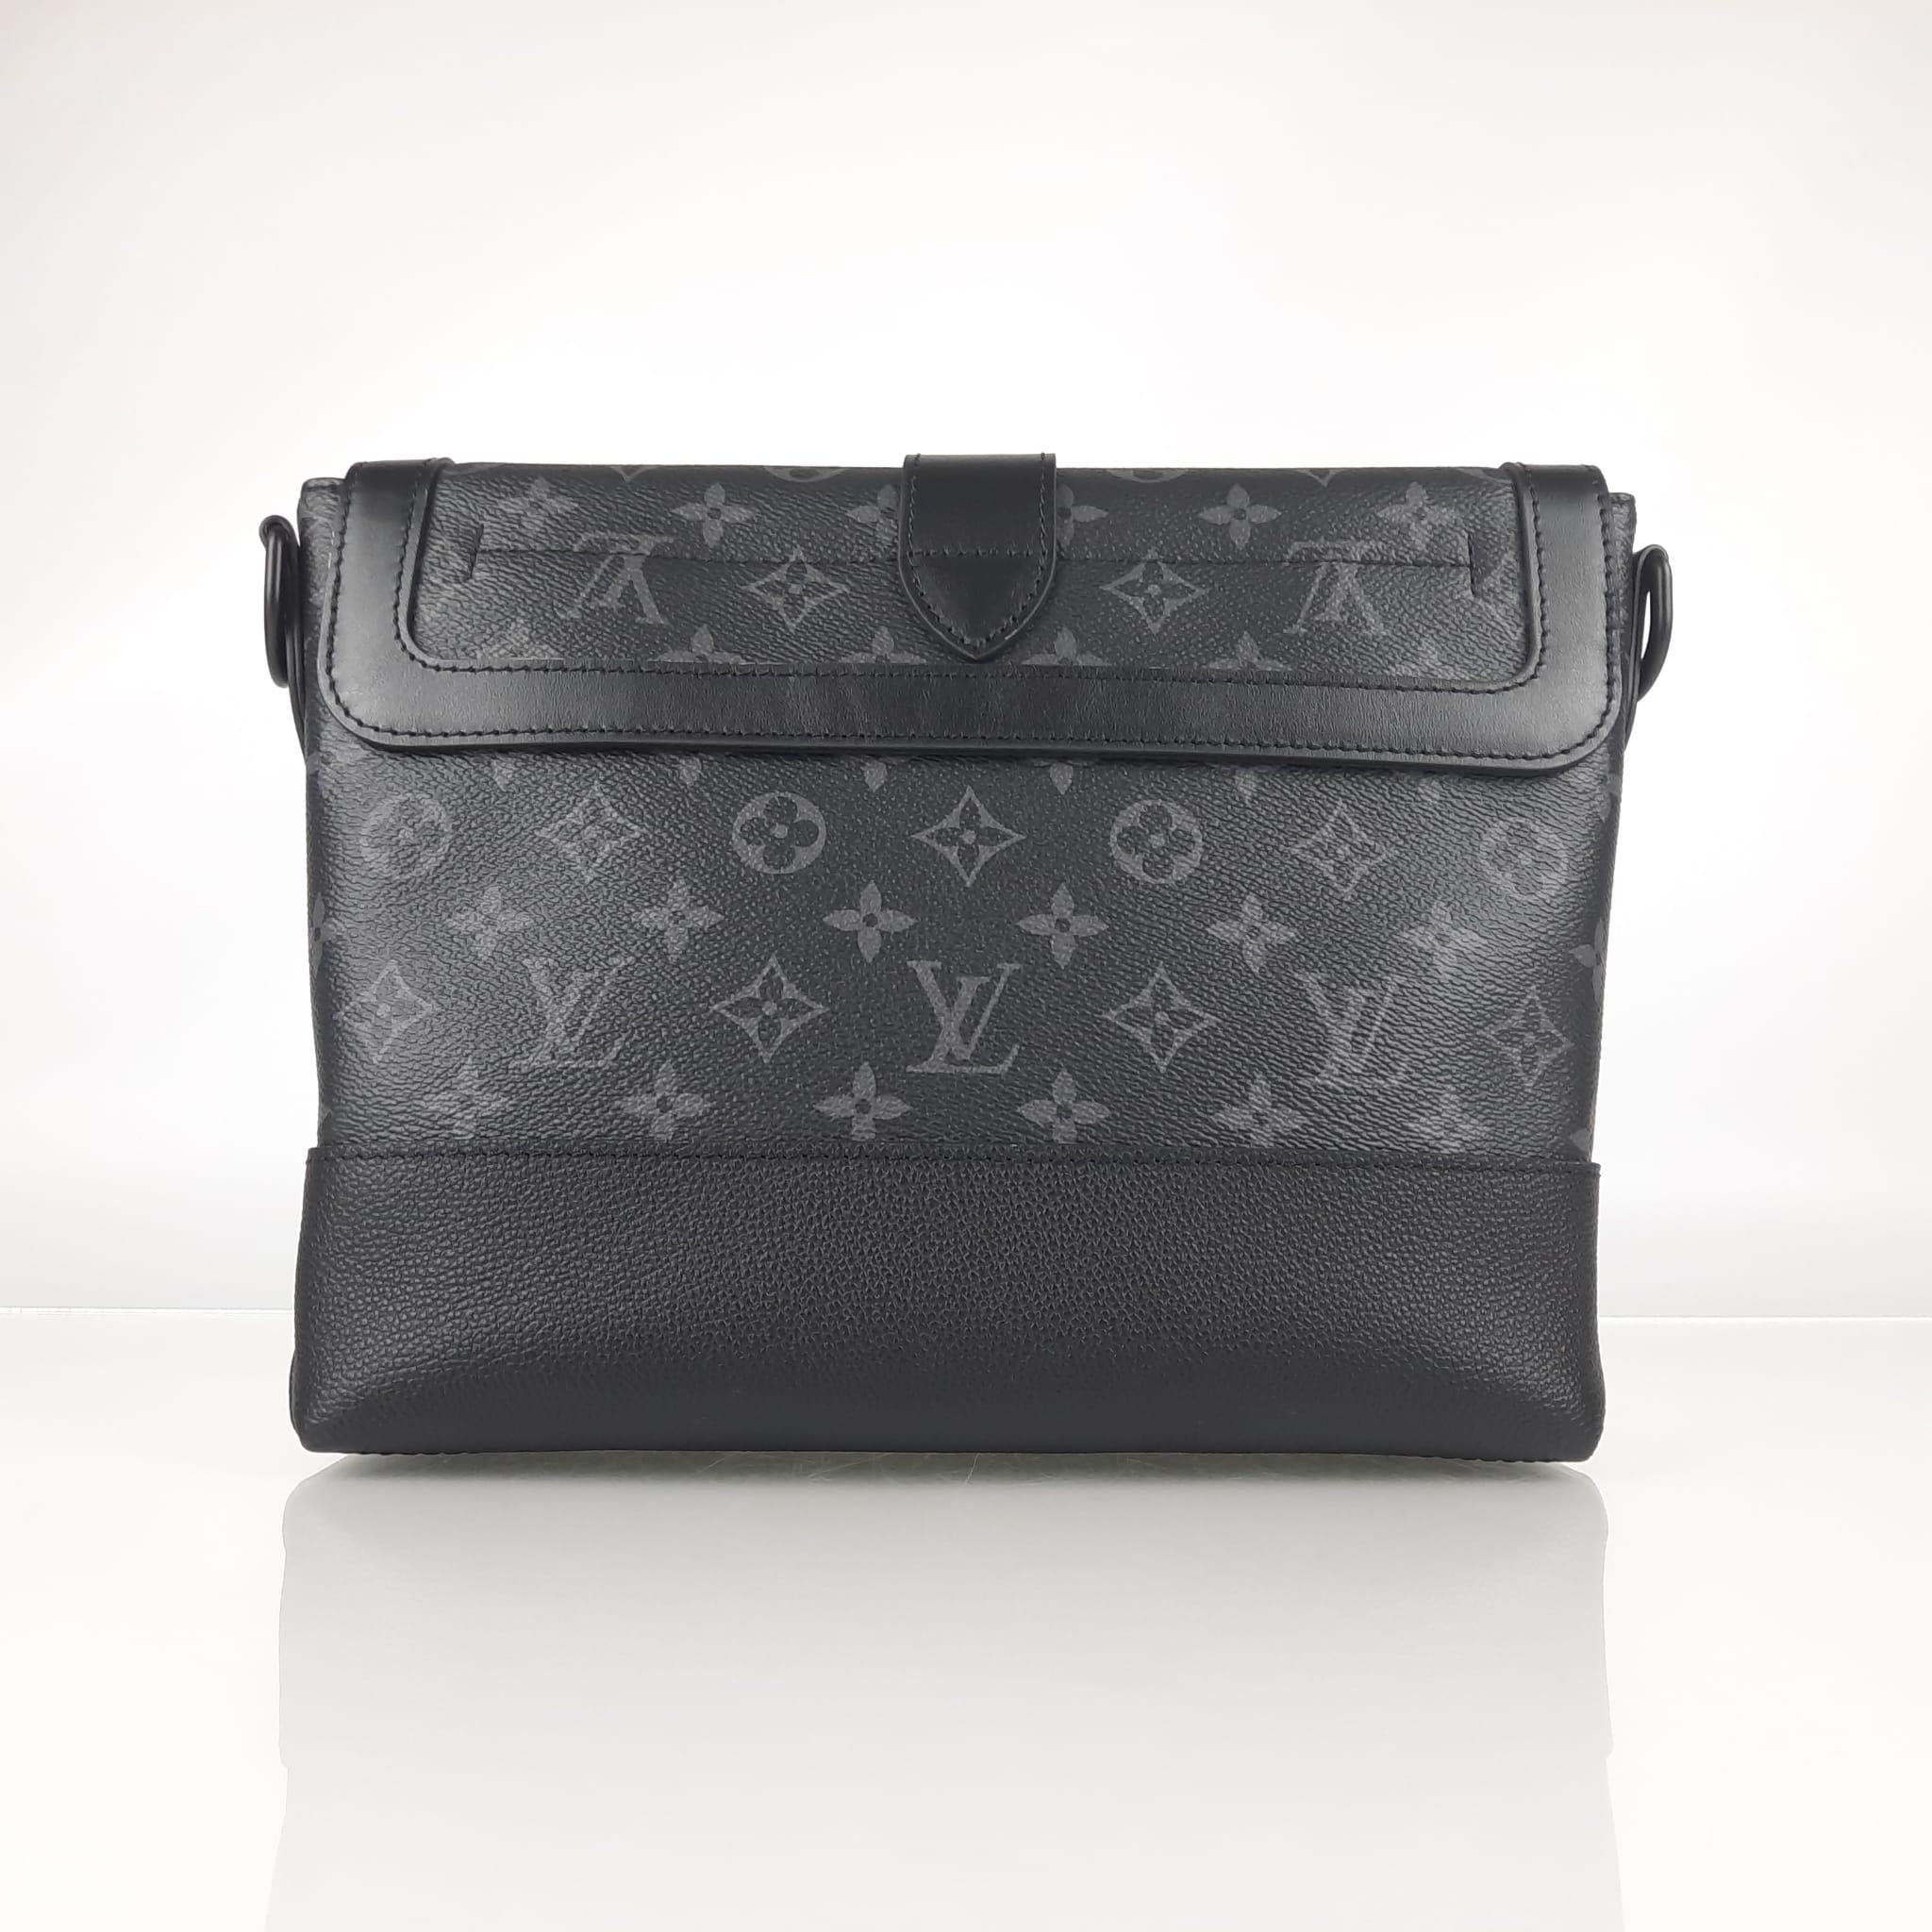 This new version of the Messenger bag pays homage to Louis Vuitton's iconic Saumur model created in 1986 and inspired by the world of horse riding. It uses a mix of Monogram Eclipse canvas and black grained leather to revisit the signatures of the